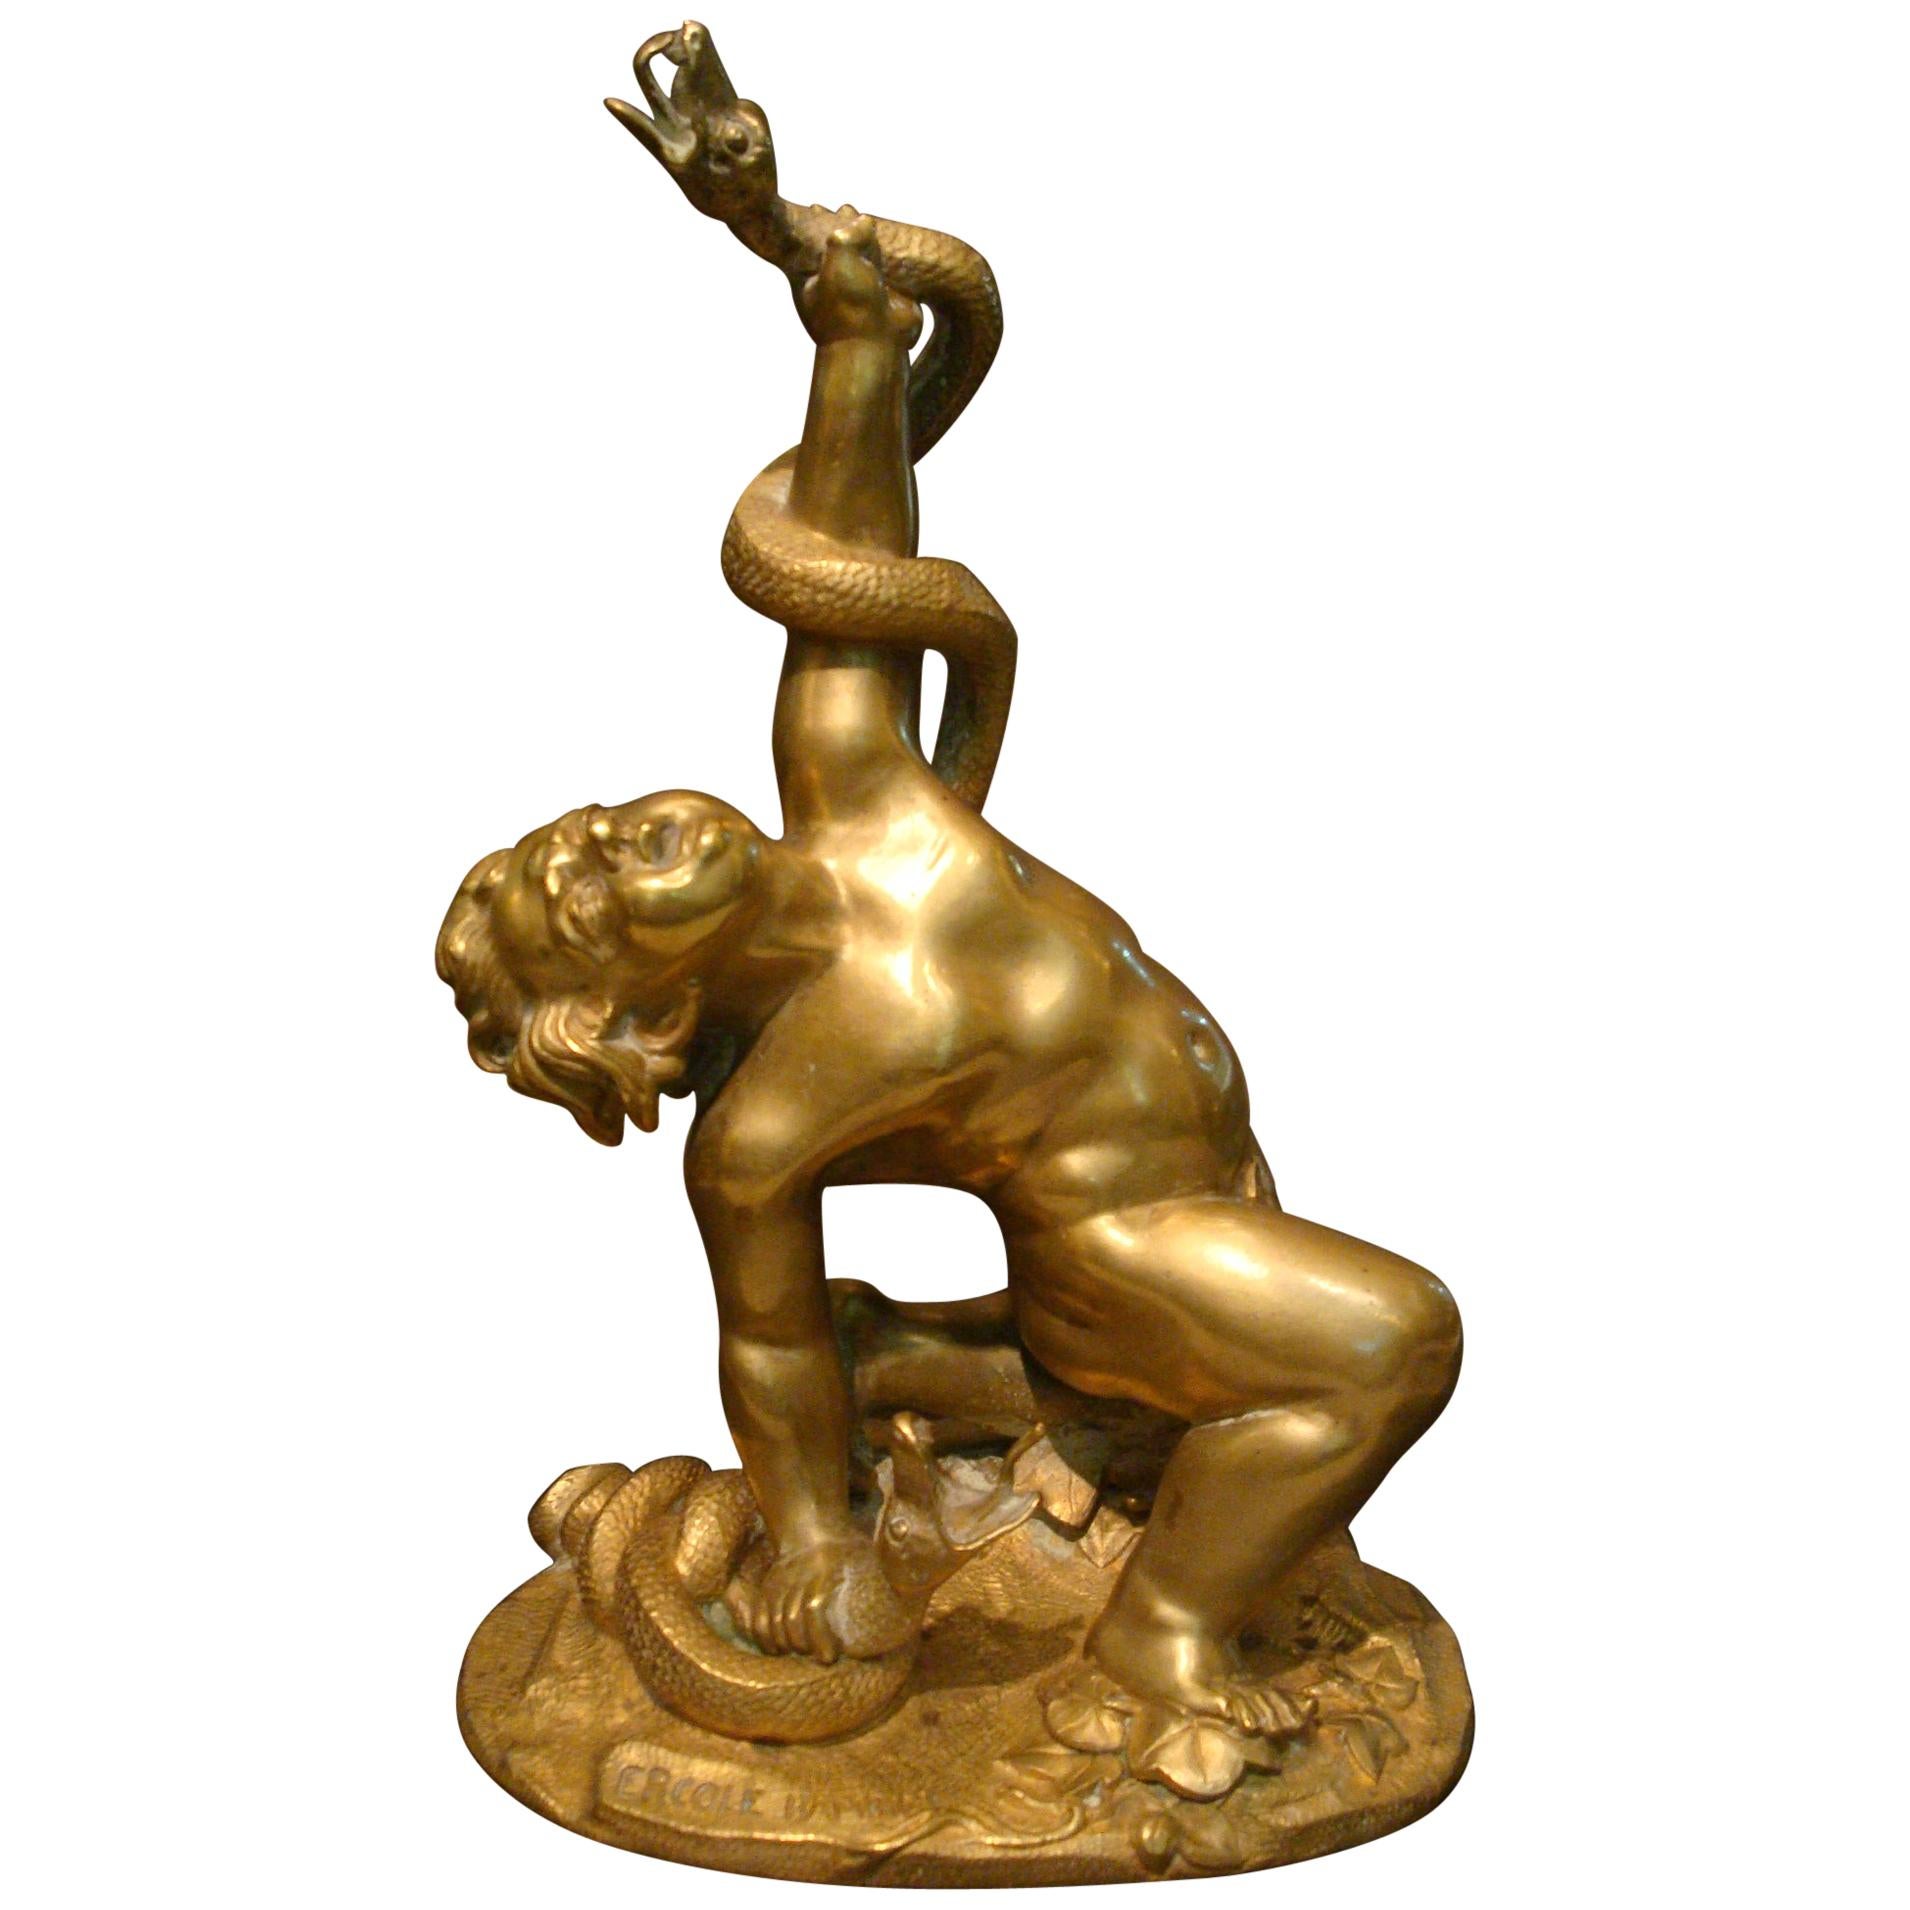 Bronze Sculpture of Infant Hercules Wrestling with Snakes, Italy, 19th Century